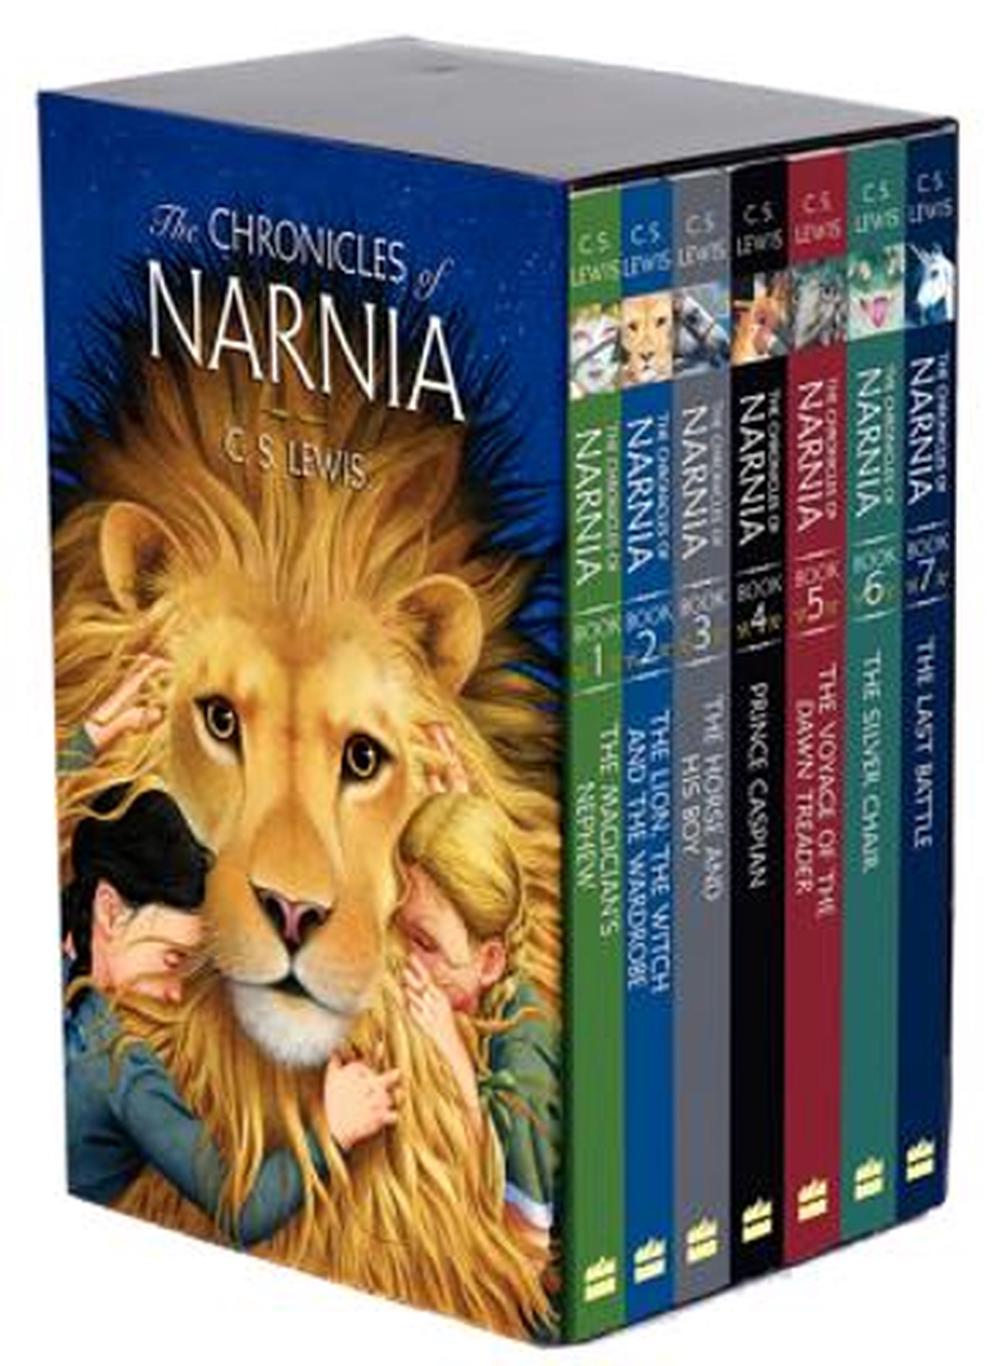 book review on the chronicles of narnia